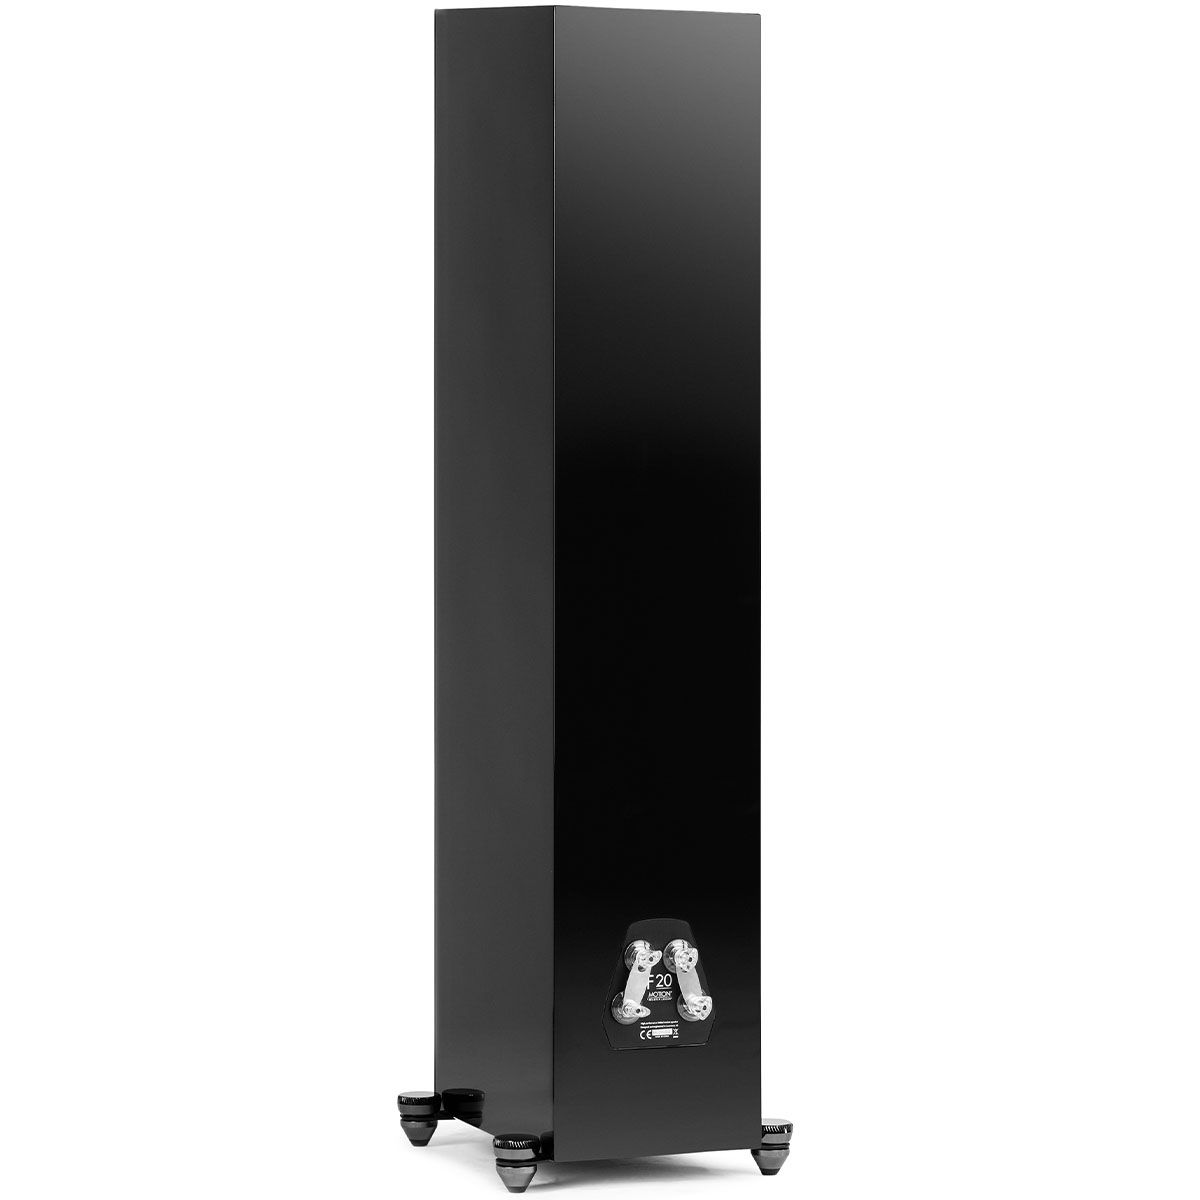 MartinLogan Motion XT F20  Floorstanding Speaker in black rear angled view without grilles on white background